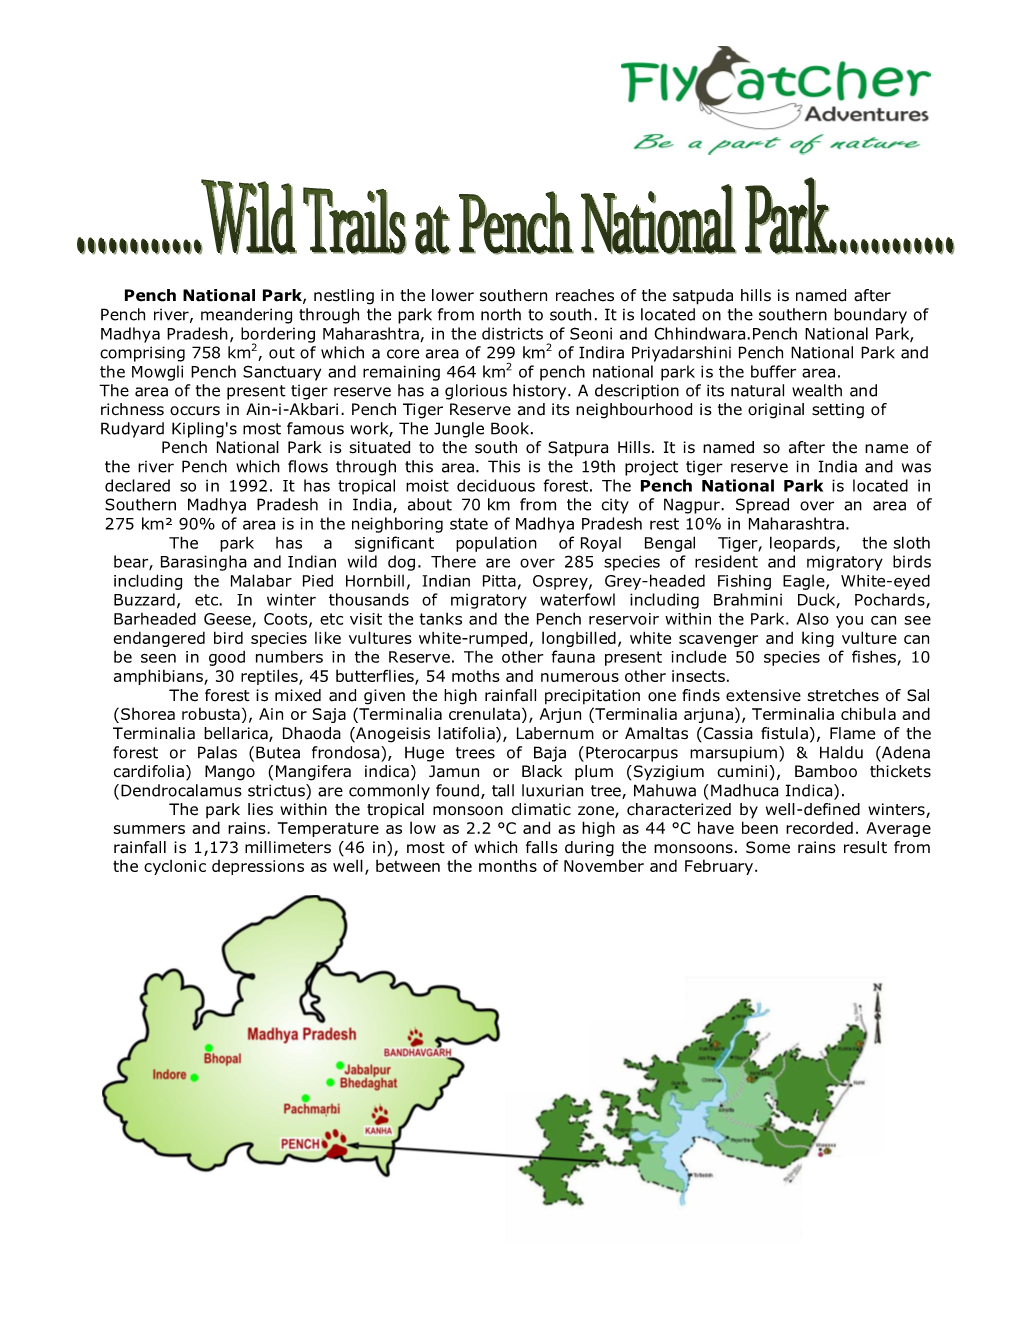 Pench National Park, Nestling in the Lower Southern Reaches of the Satpuda Hills Is Named After Pench River, Meandering Through the Park from North to South